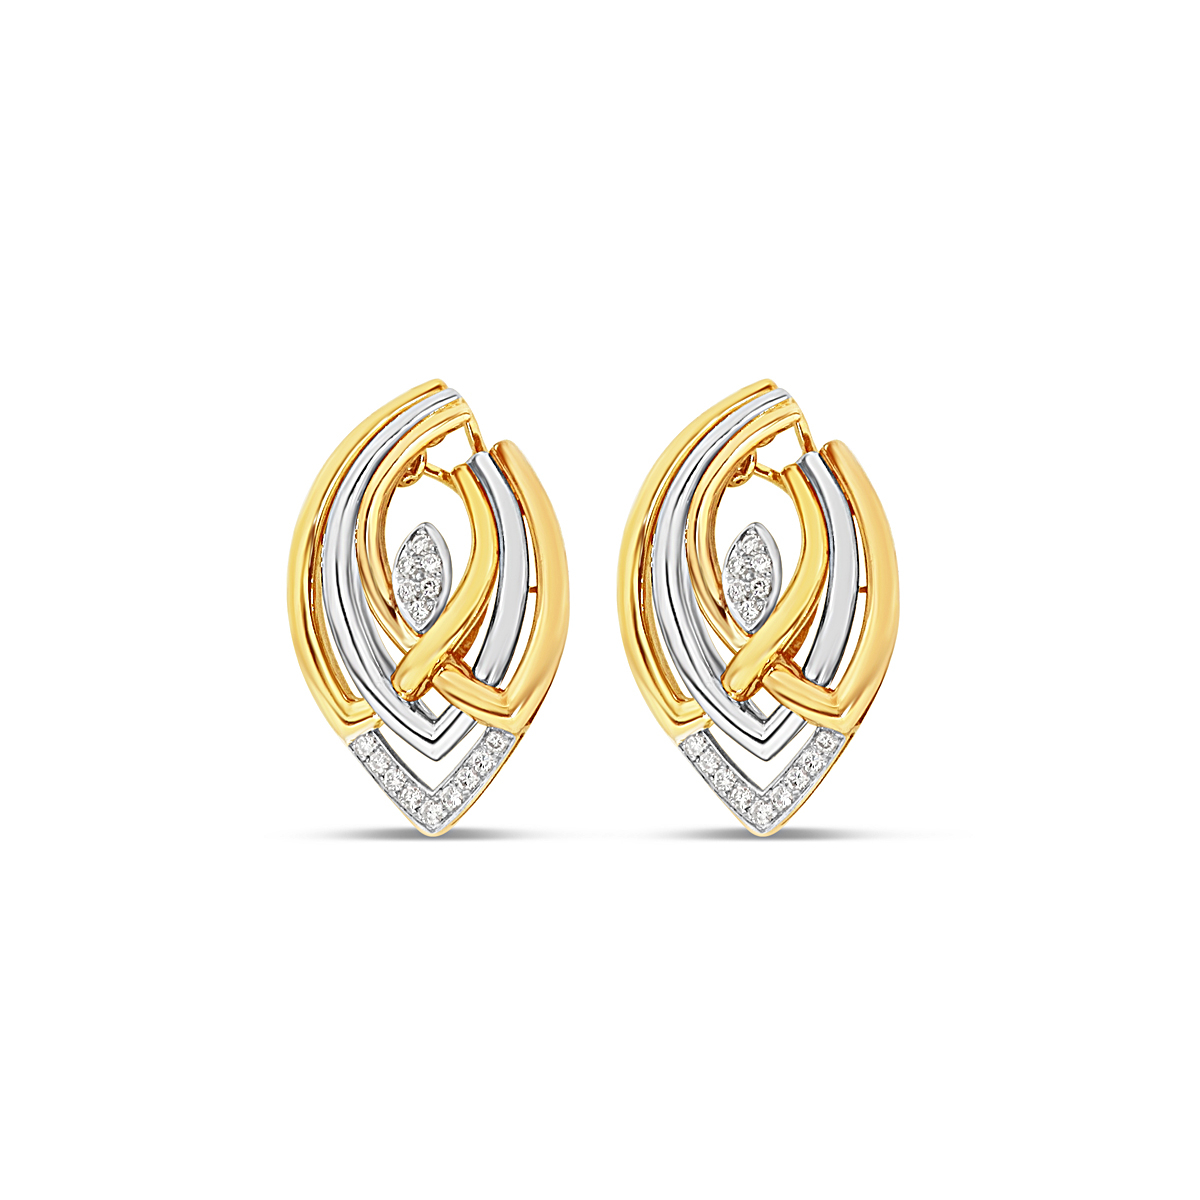 Twisted Two-Tone 18K White and Yellow Gold Earrings with Diamonds